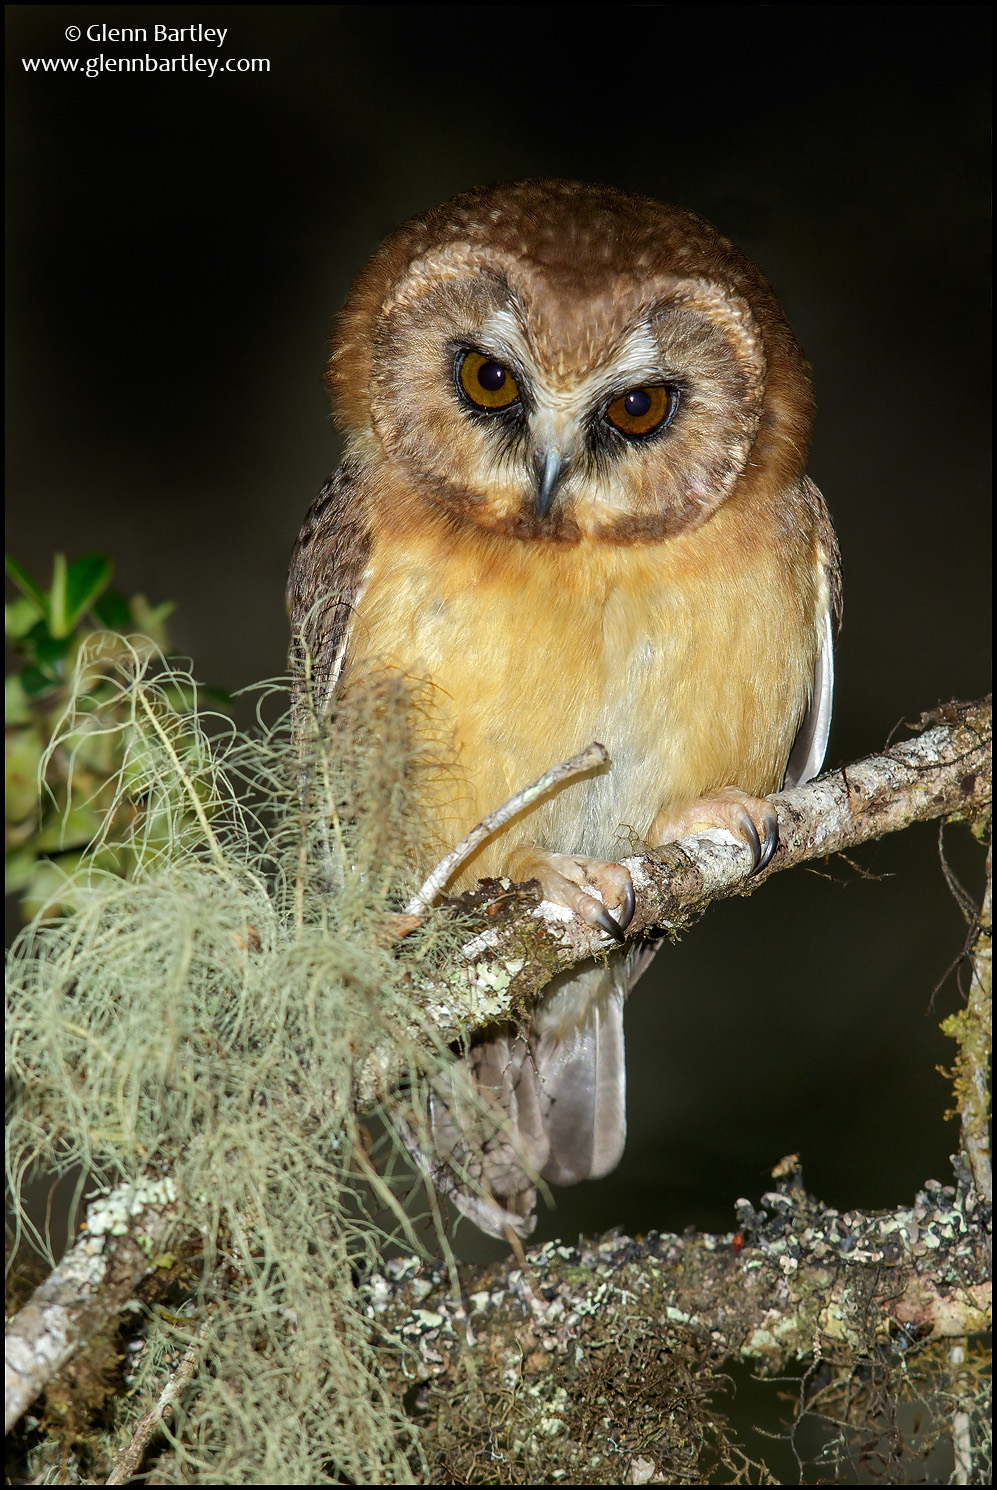 Unspotted%20Saw%20Whet%20Owl%20-%2001.jpg